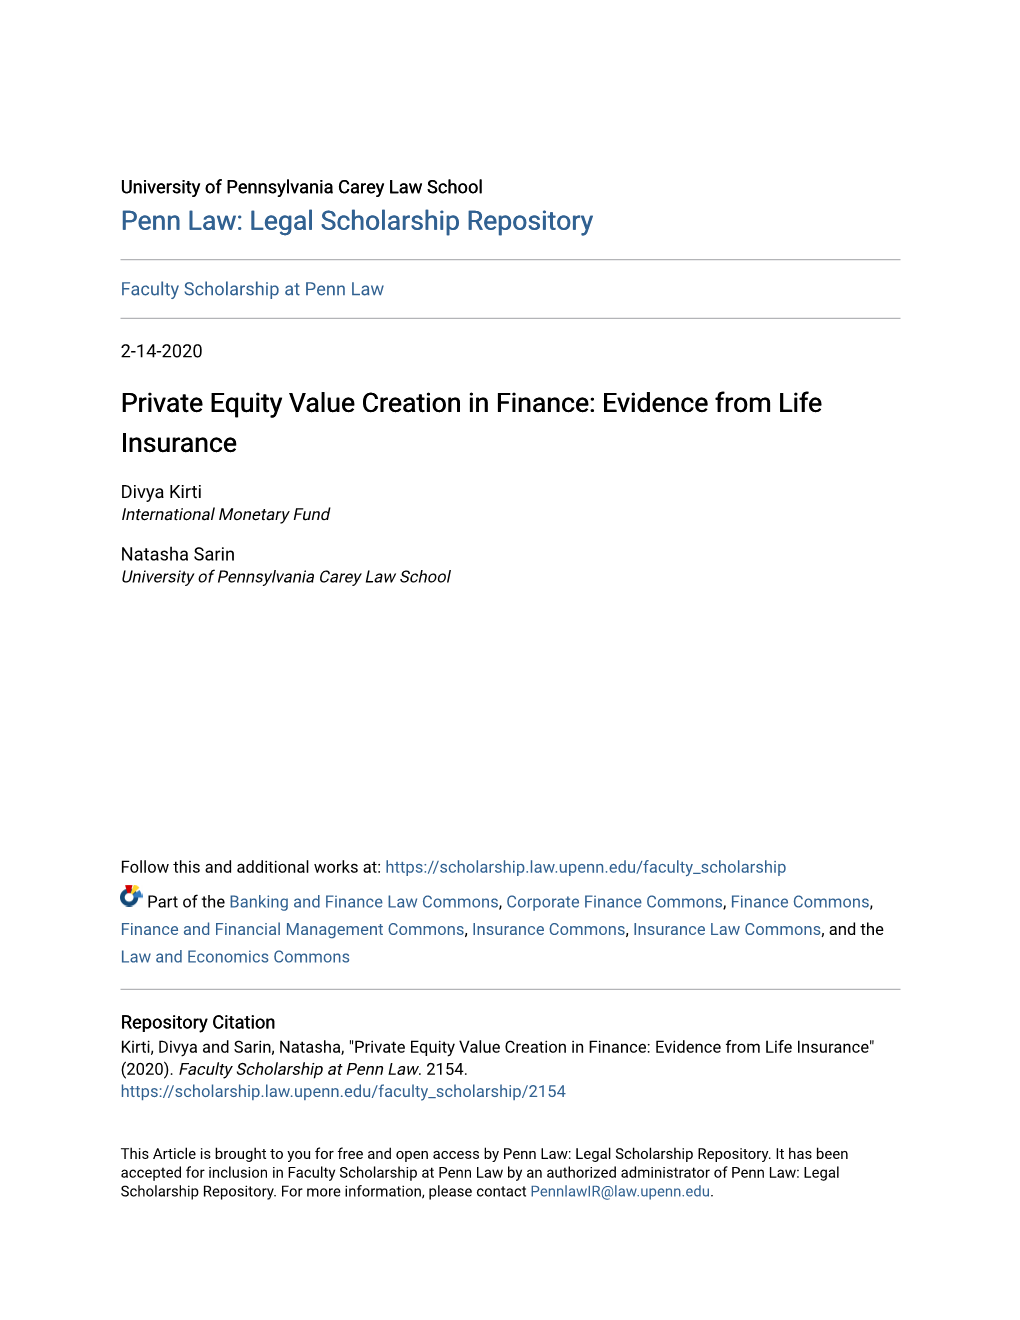 Private Equity Value Creation in Finance: Evidence from Life Insurance